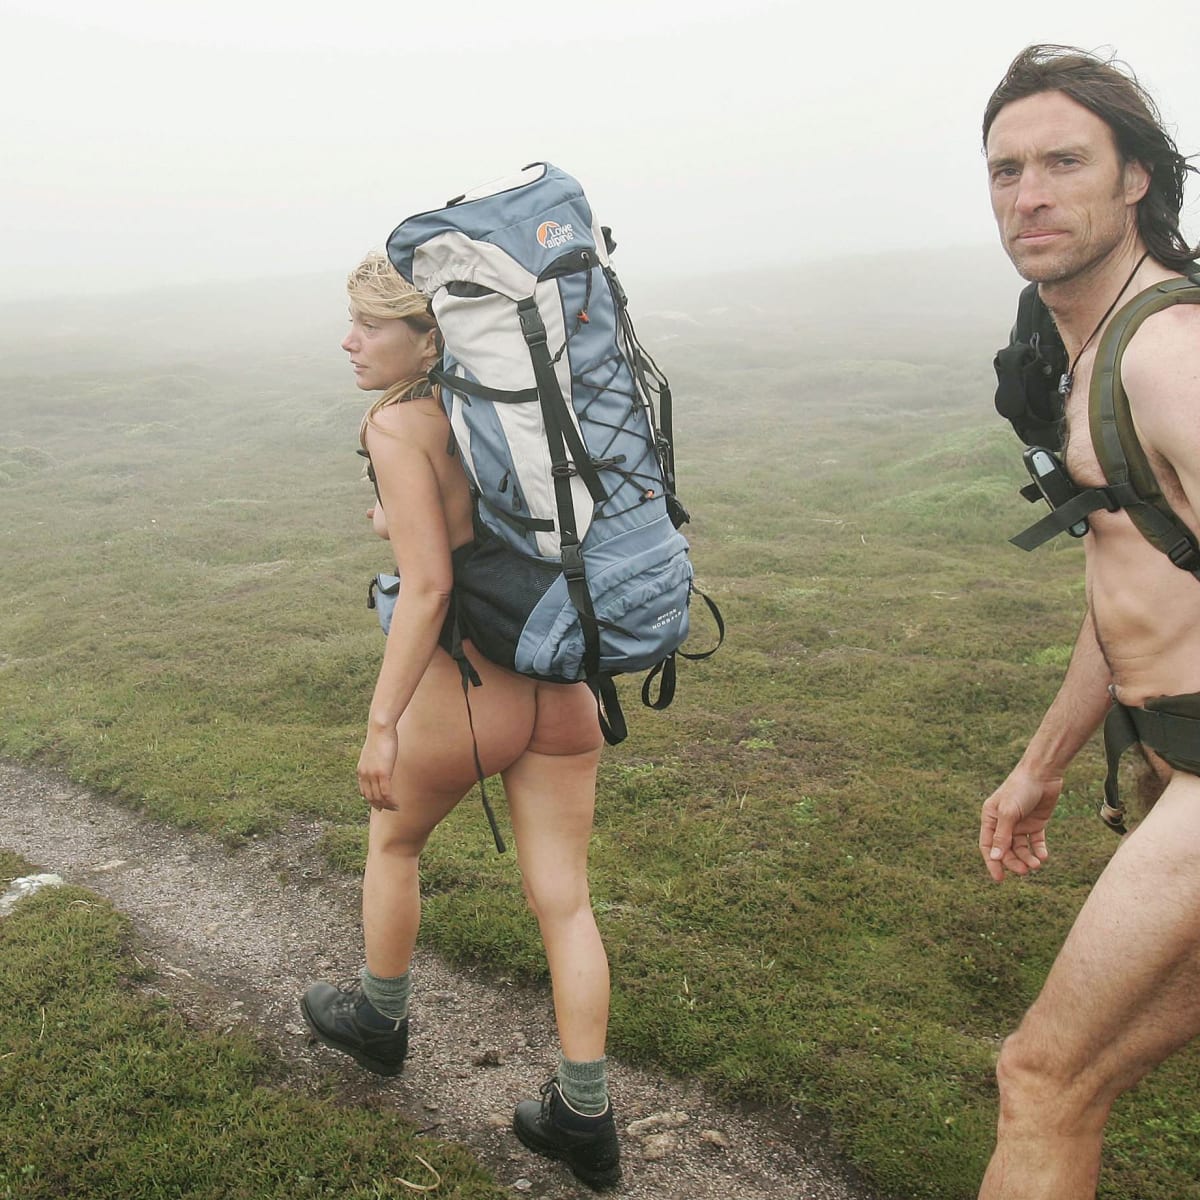 Happy Nude Hiking Day! Heres How to (Legally) Make the Most of It pic